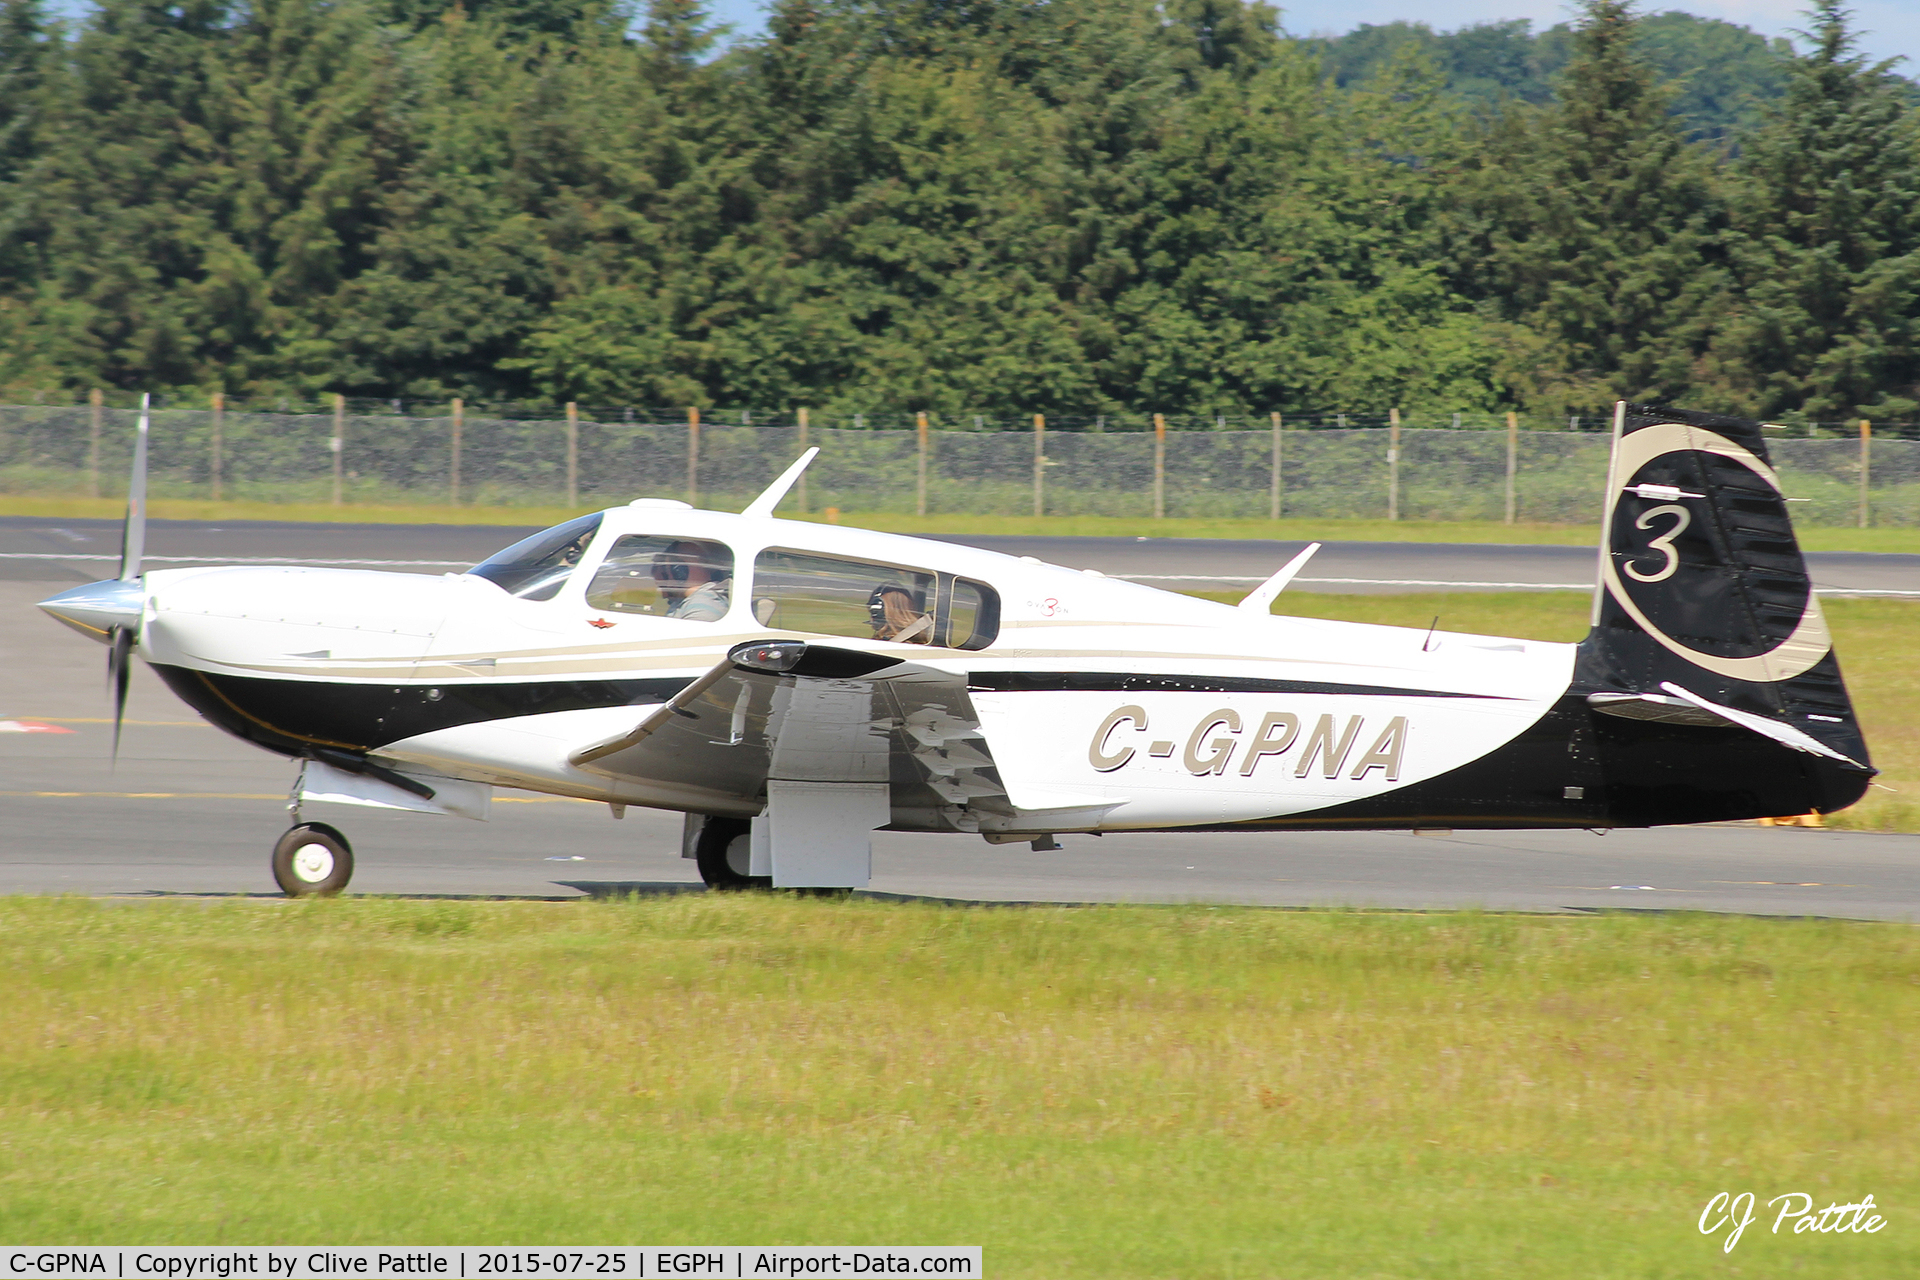 C-GPNA, 2007 Mooney M20R Ovation C/N 29-0487, Taxy to take-off from rwy 06 at Edinburgh EGPH - note the friendly wave !